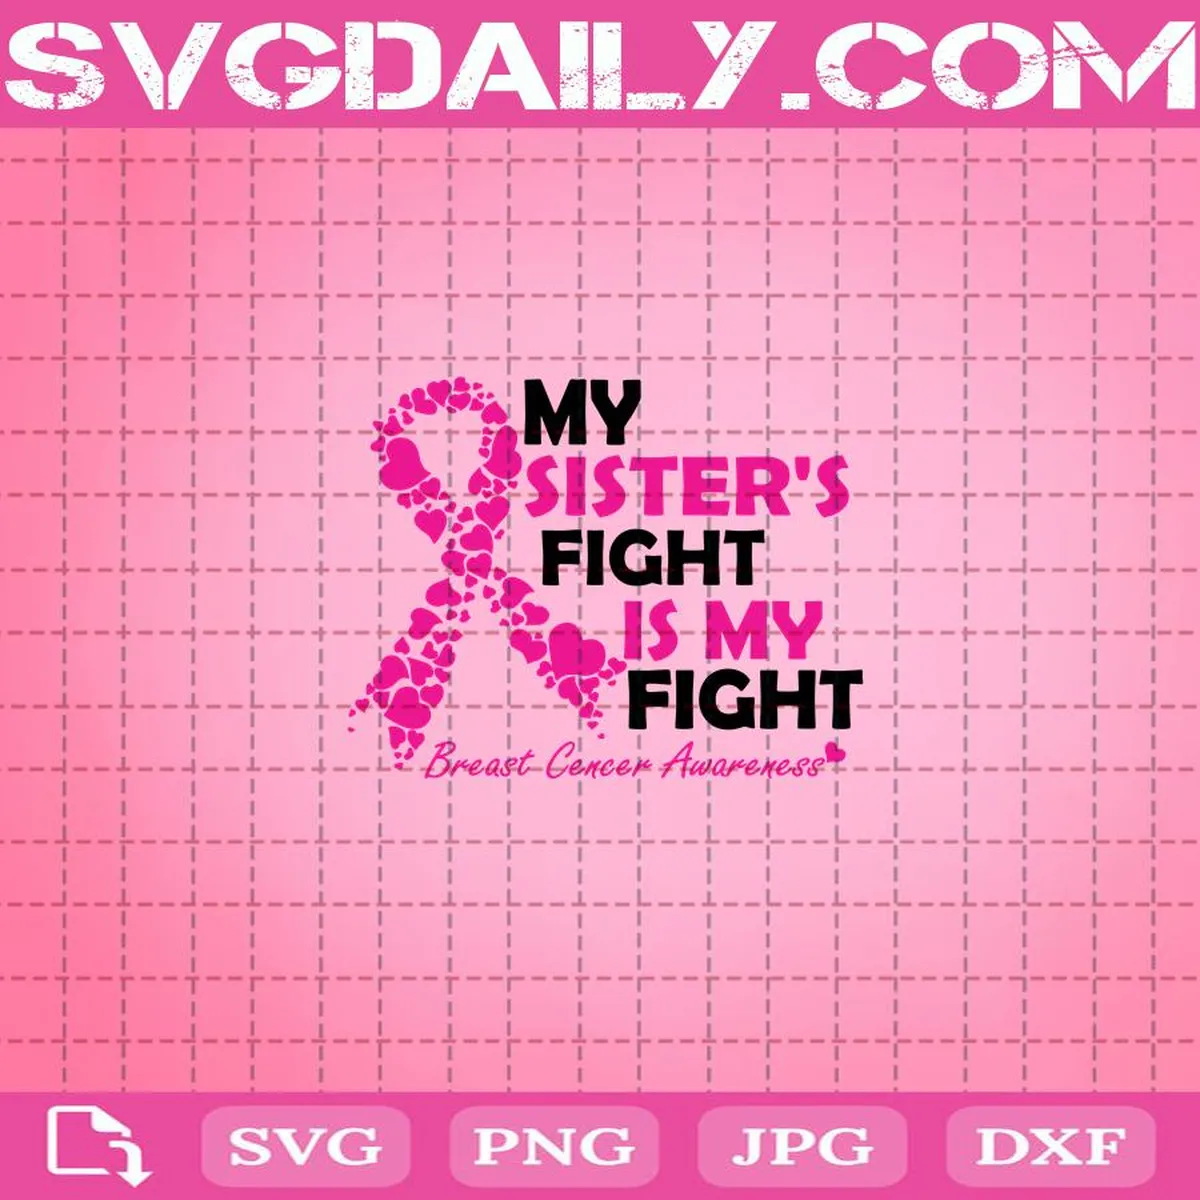 My Sister's Fight Is My Fight Svg, Pink Ribbon Svg, Breast Cancer Awareness Svg, Svg Png Dxf Eps AI Instant Download